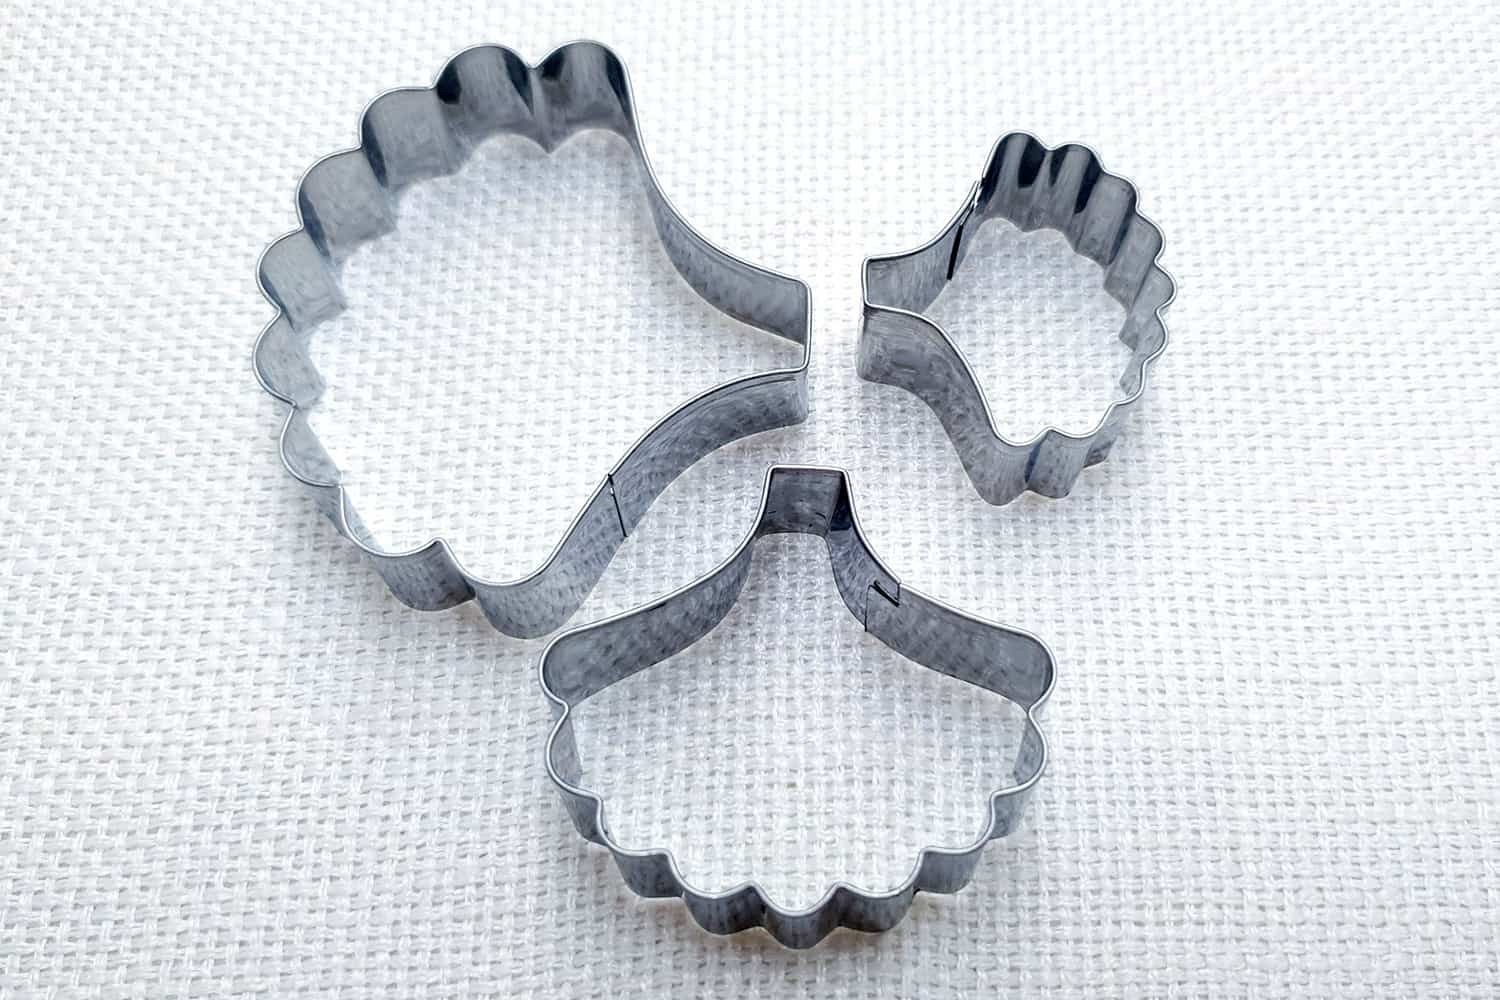 3-pcs Stainless steel broccoli shape cutters (22053)